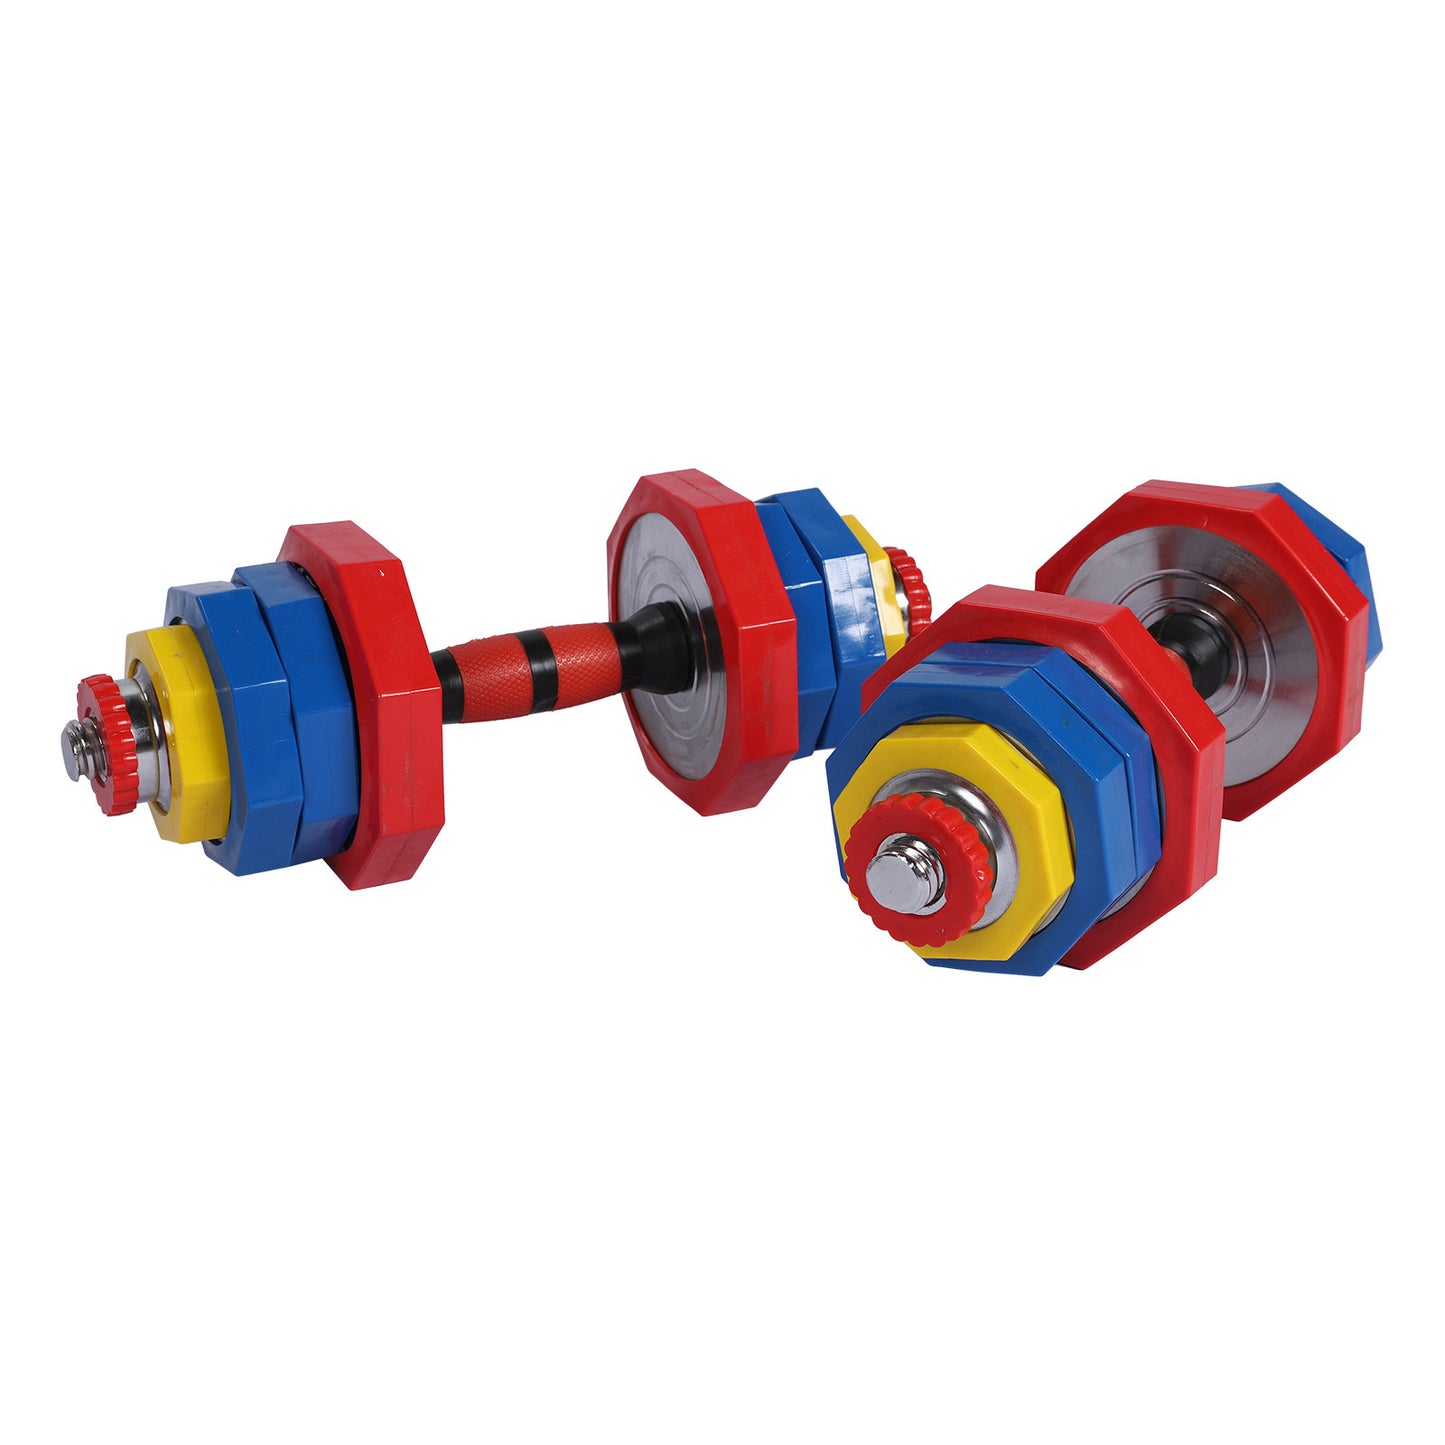 Adjustable Dumbbell 27.5lbs Fast Adjustment Function With Weight Plate 1 Pair